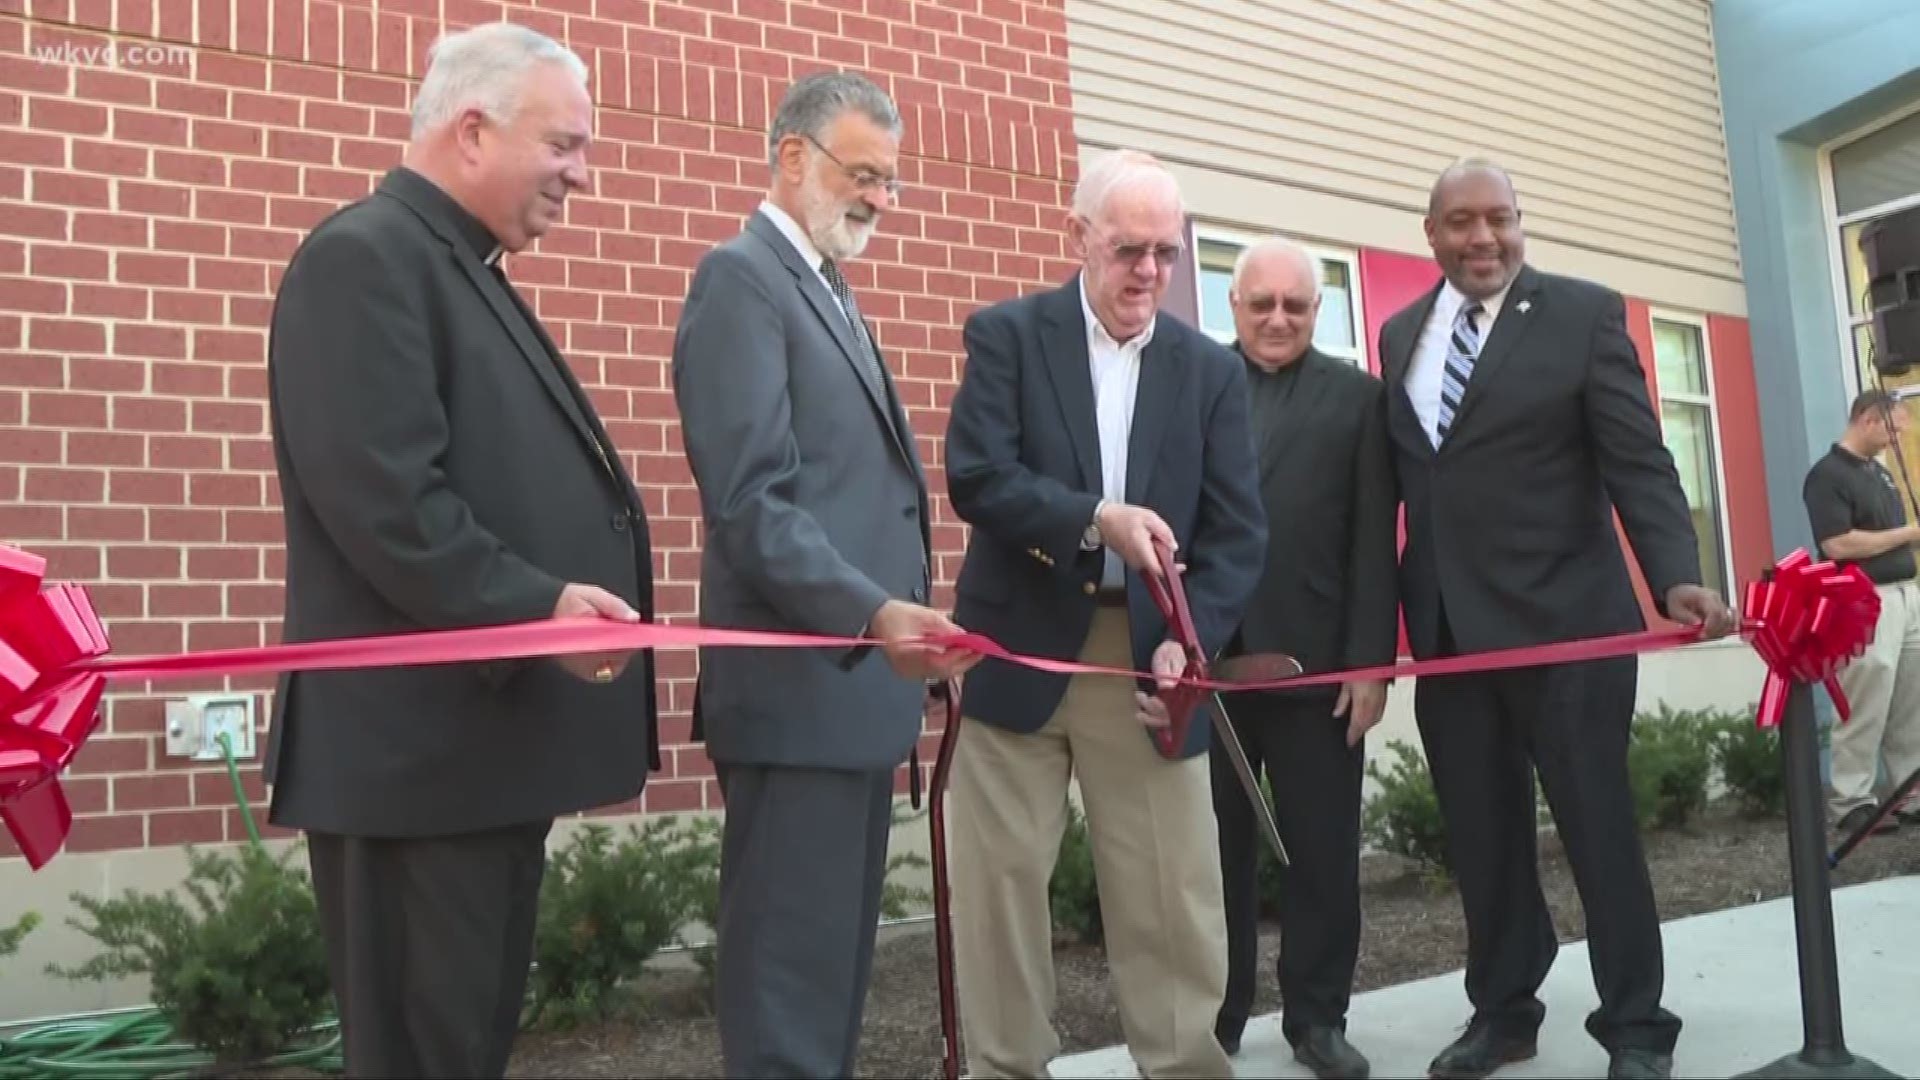 Tuesday was a festive day at St. Adalbert School in Cleveland's Fairfax neighborhood. They cut the ribbon on a new early childhood education center.